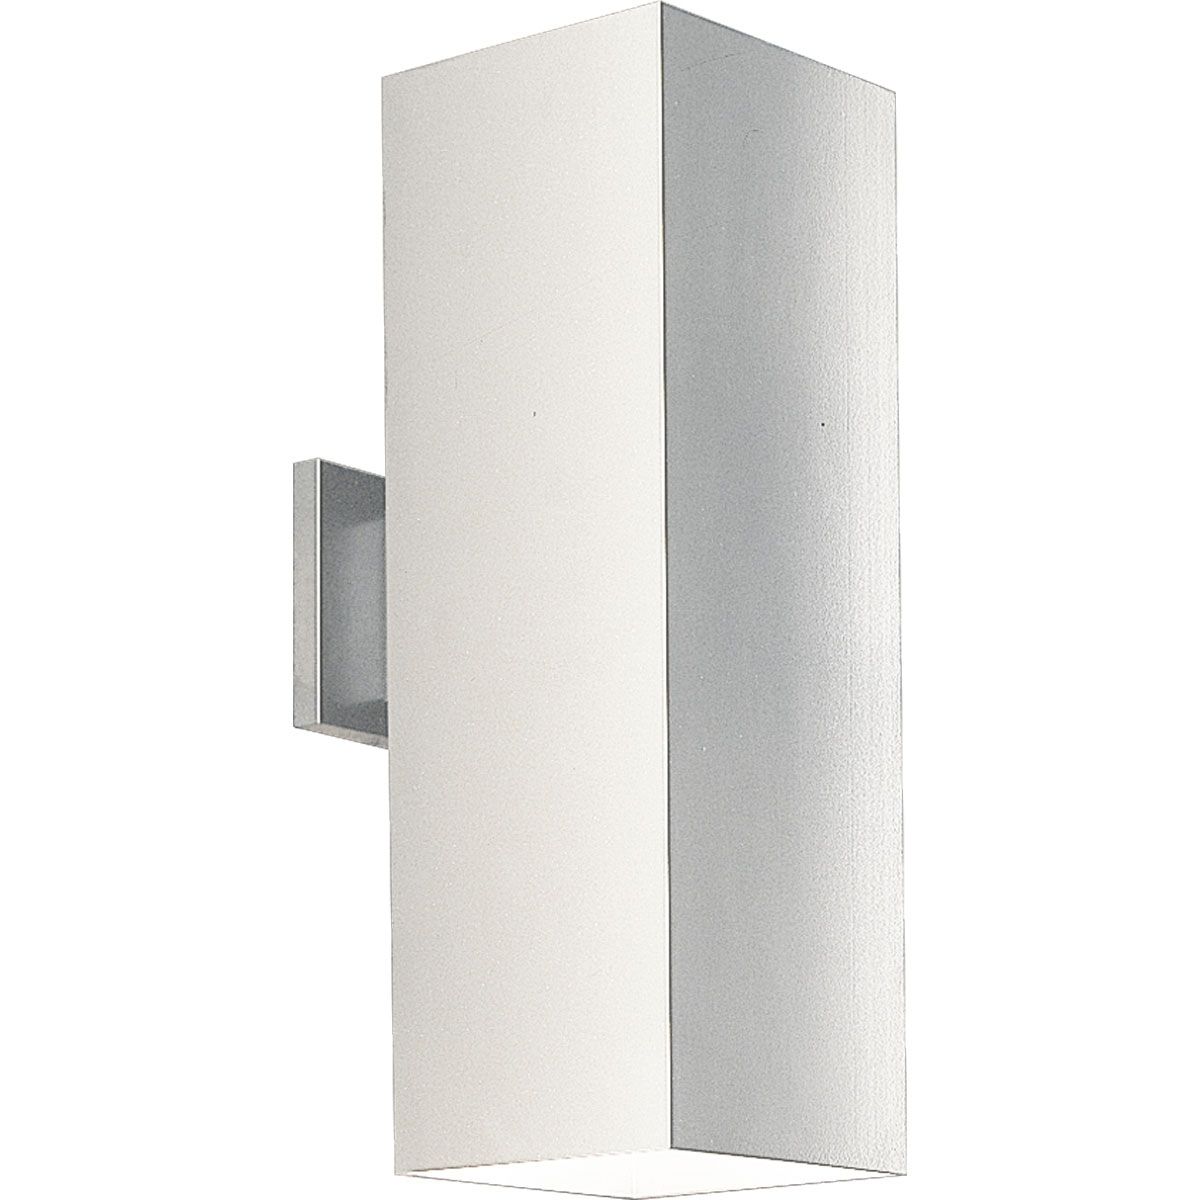 Progress Lighting, Square Series Wall Lights – P5644 30 Intended For Outdoor Wall Mount Lighting Fixtures (View 4 of 15)